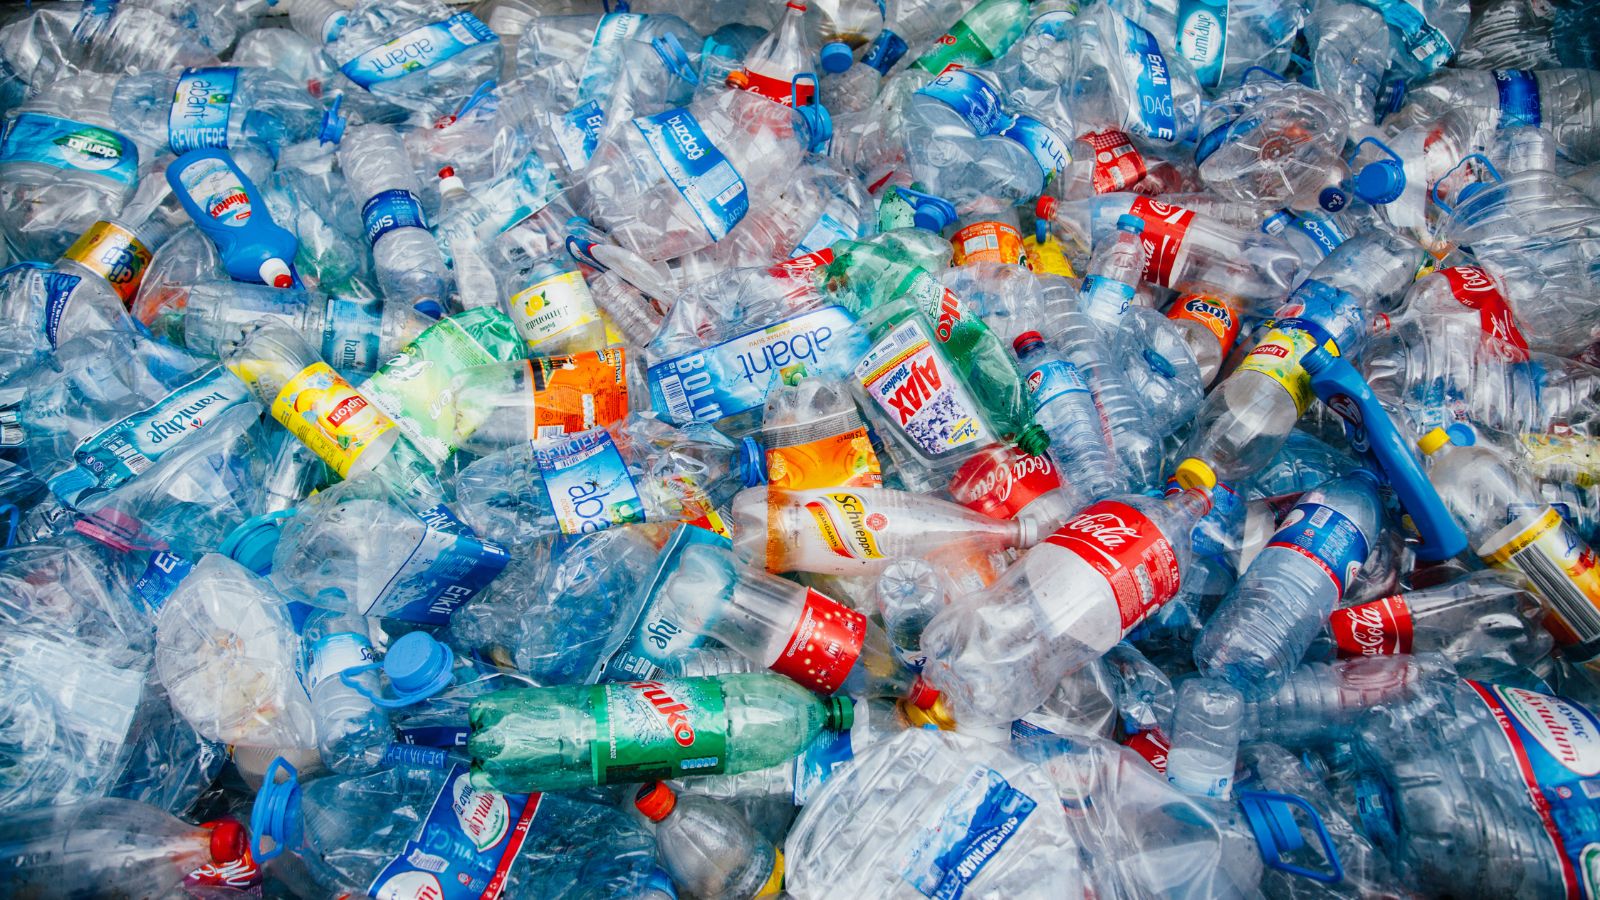 Earth Day: An Opportunity to Address the Environmental Injustice of Plastic Pollution